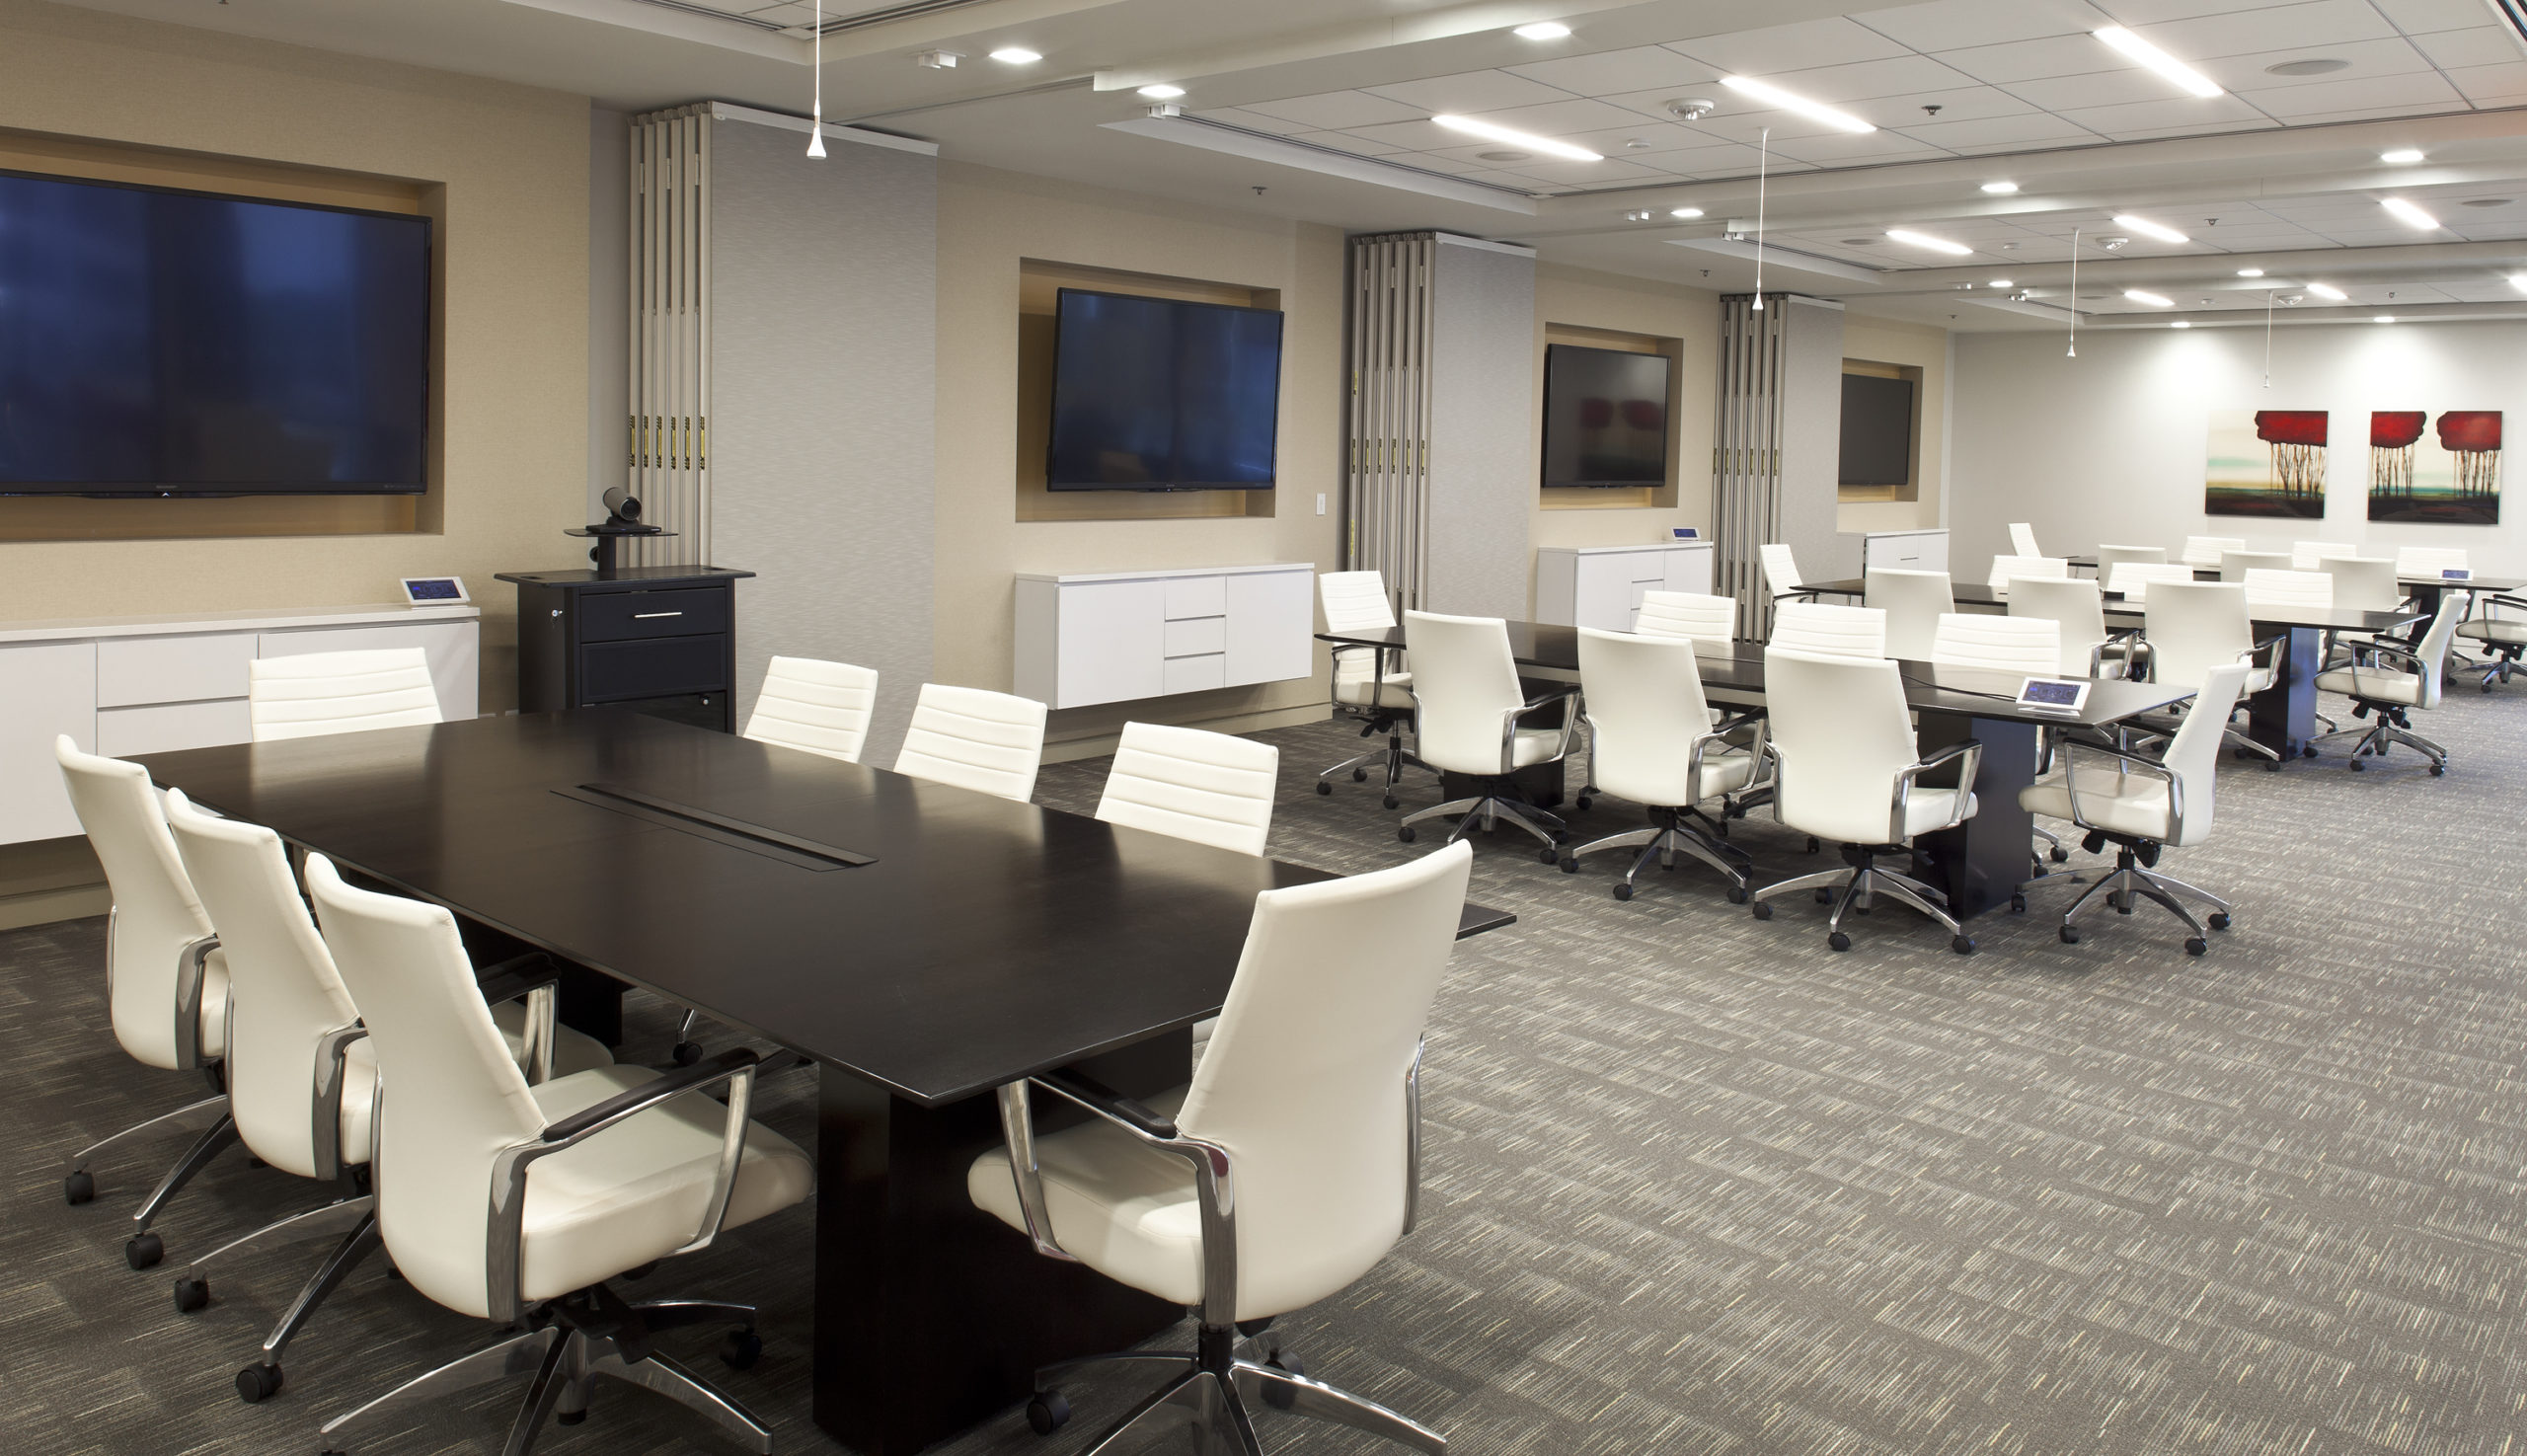 LOUNGE. BOARD ROOM, 4 WAY DIVISIBLE CONFERENCE ROOM,